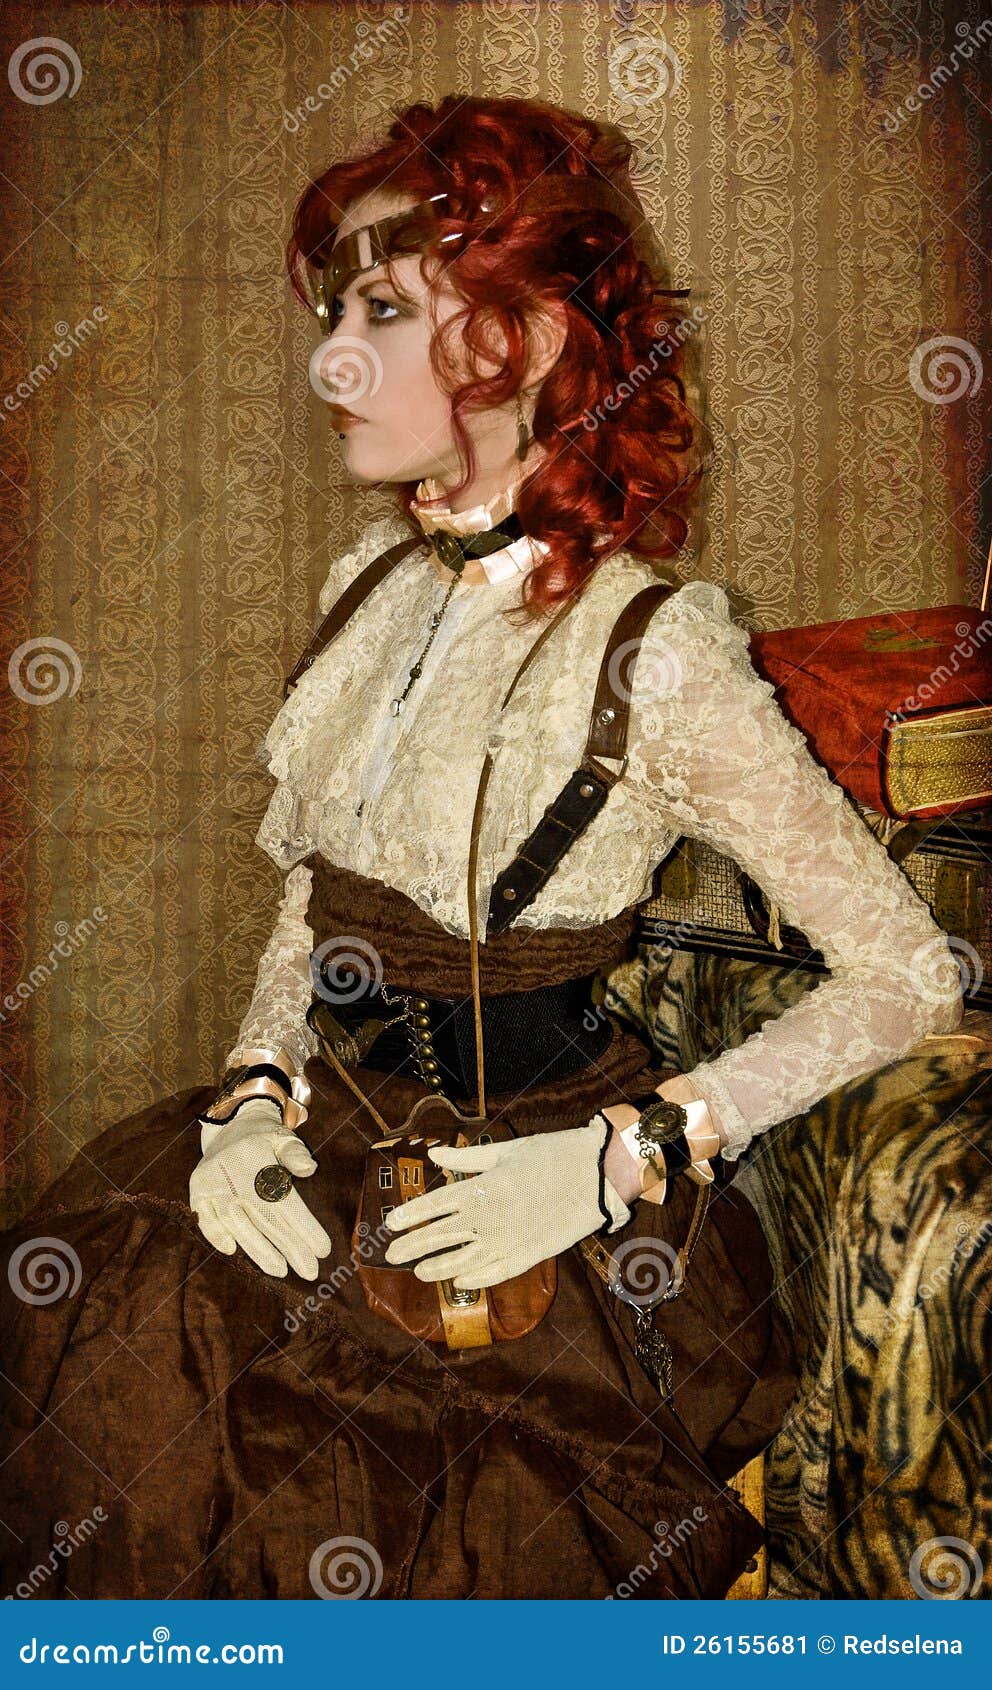 Steampunk Victorian Girl Stock Image - Image: 26155681